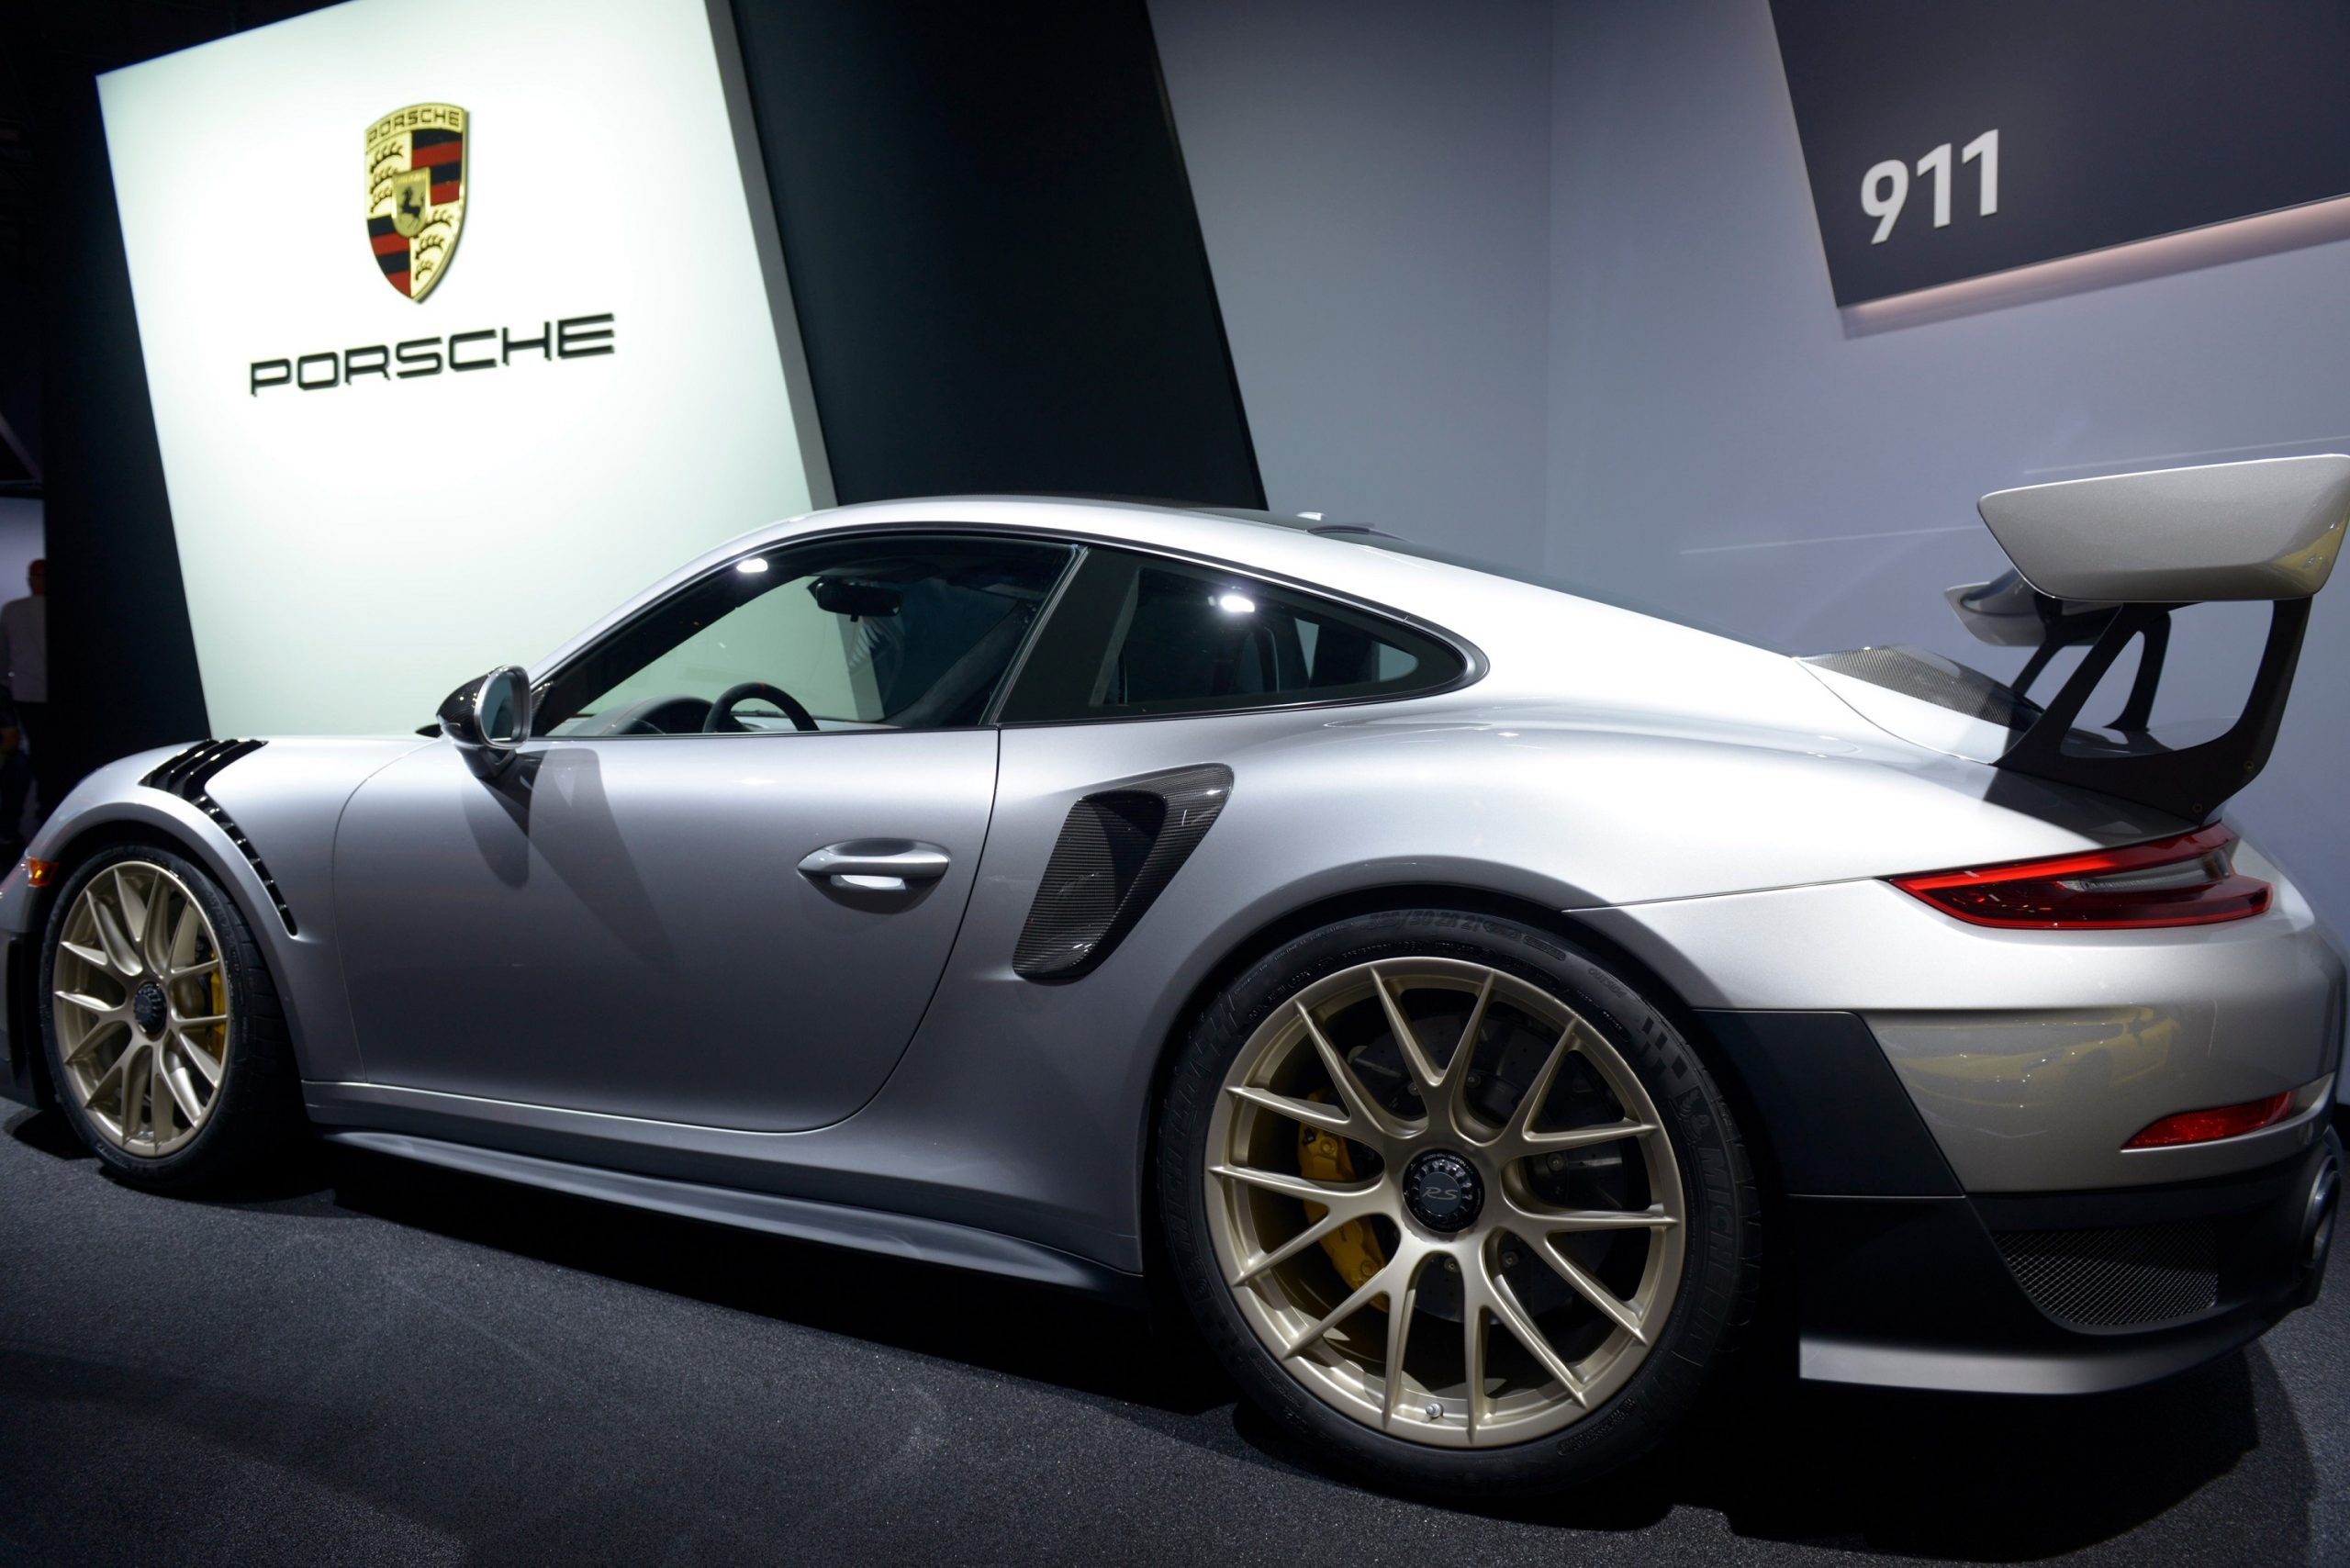 The Porsche 911 GT2 RS with magnesium wheels, one of the most expensive new car options ever, costing $20,000